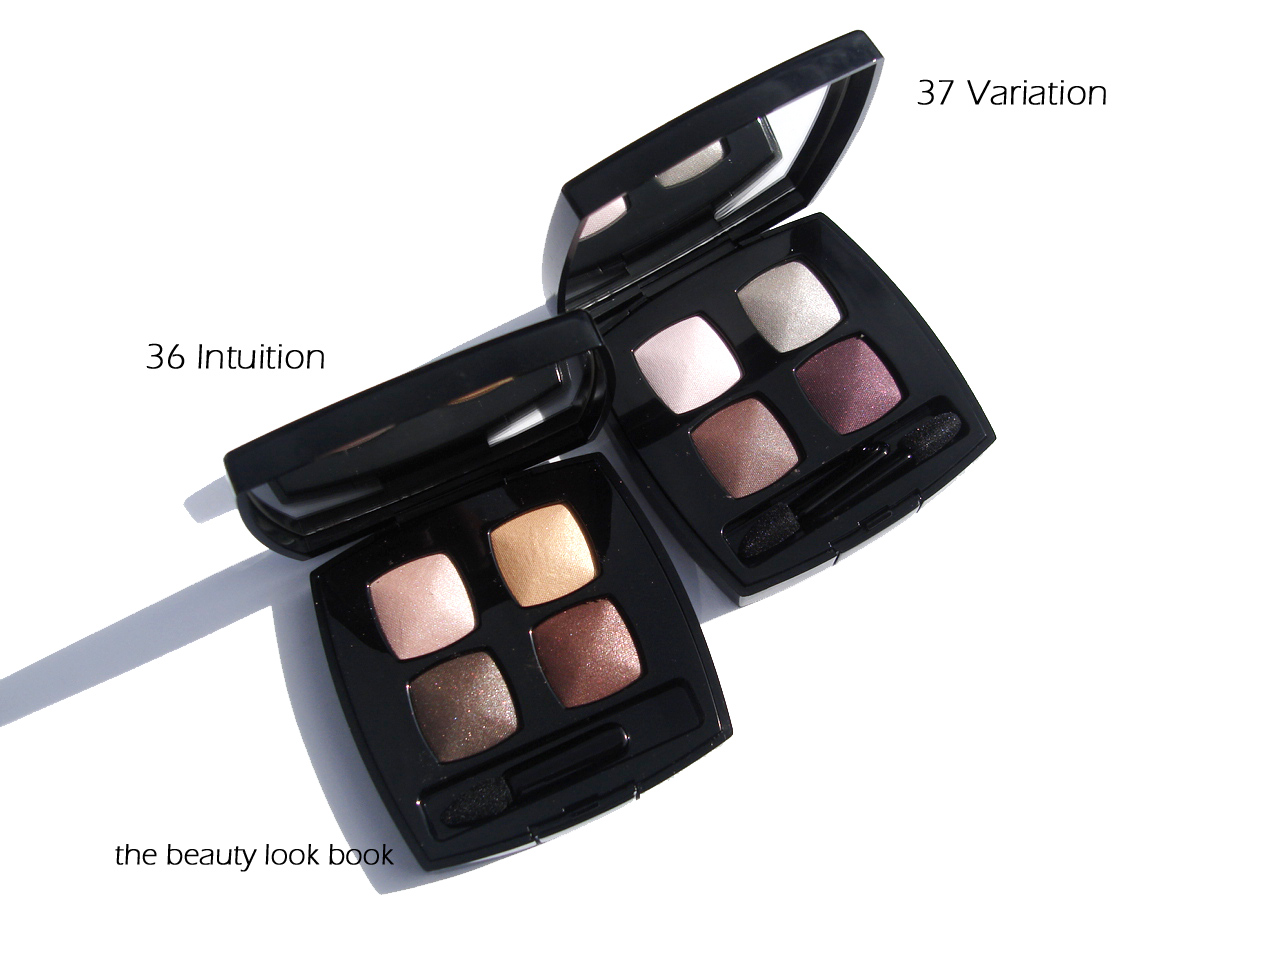 Chanel Intuition #36 and Variation #37 Quadra Eye Shadows - The